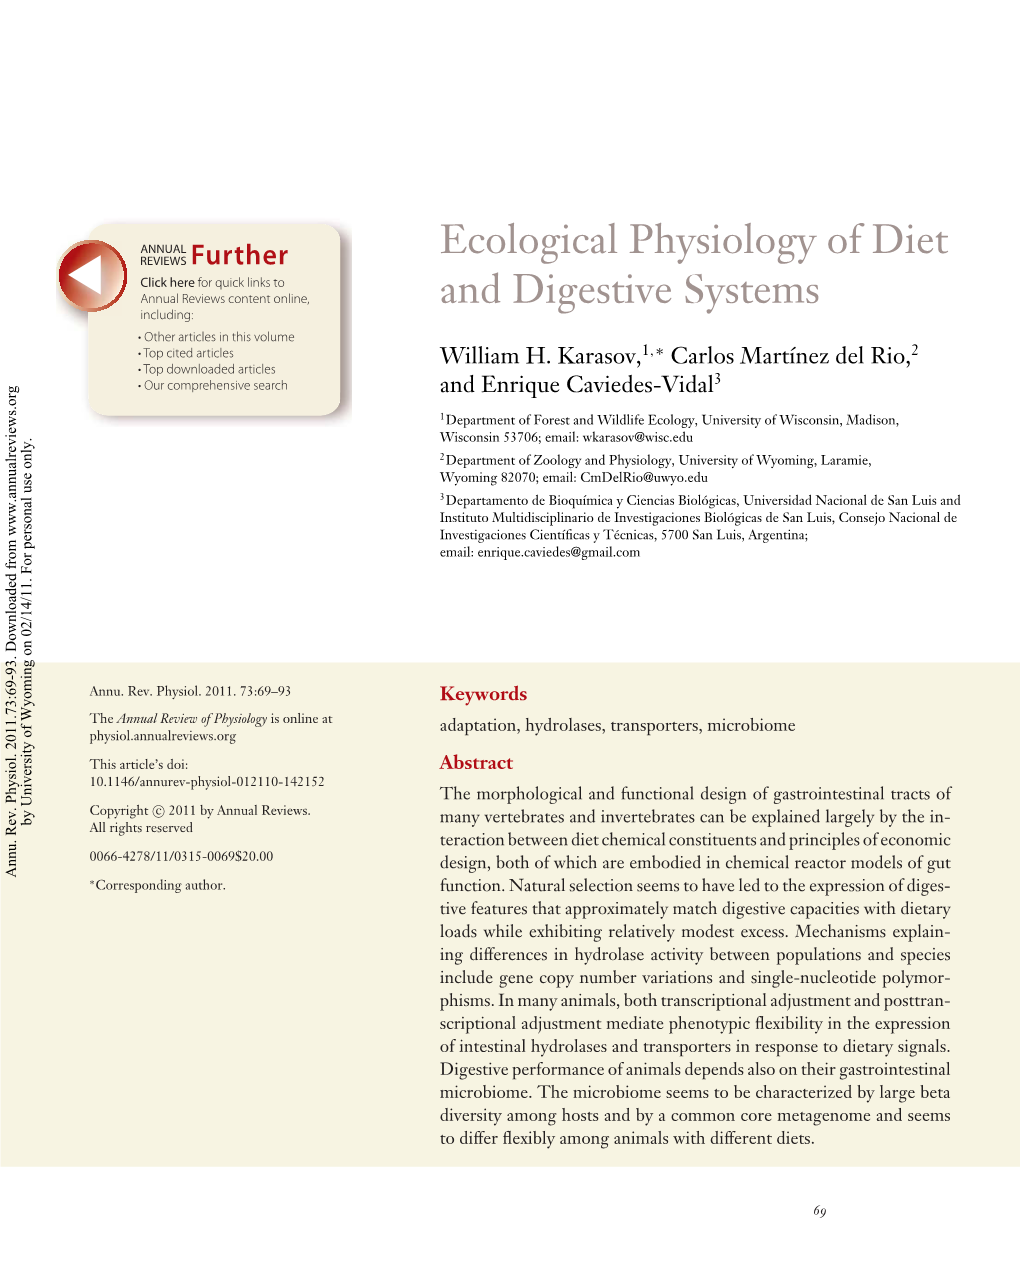 Ecological Physiology of Diet and Digestive Systems